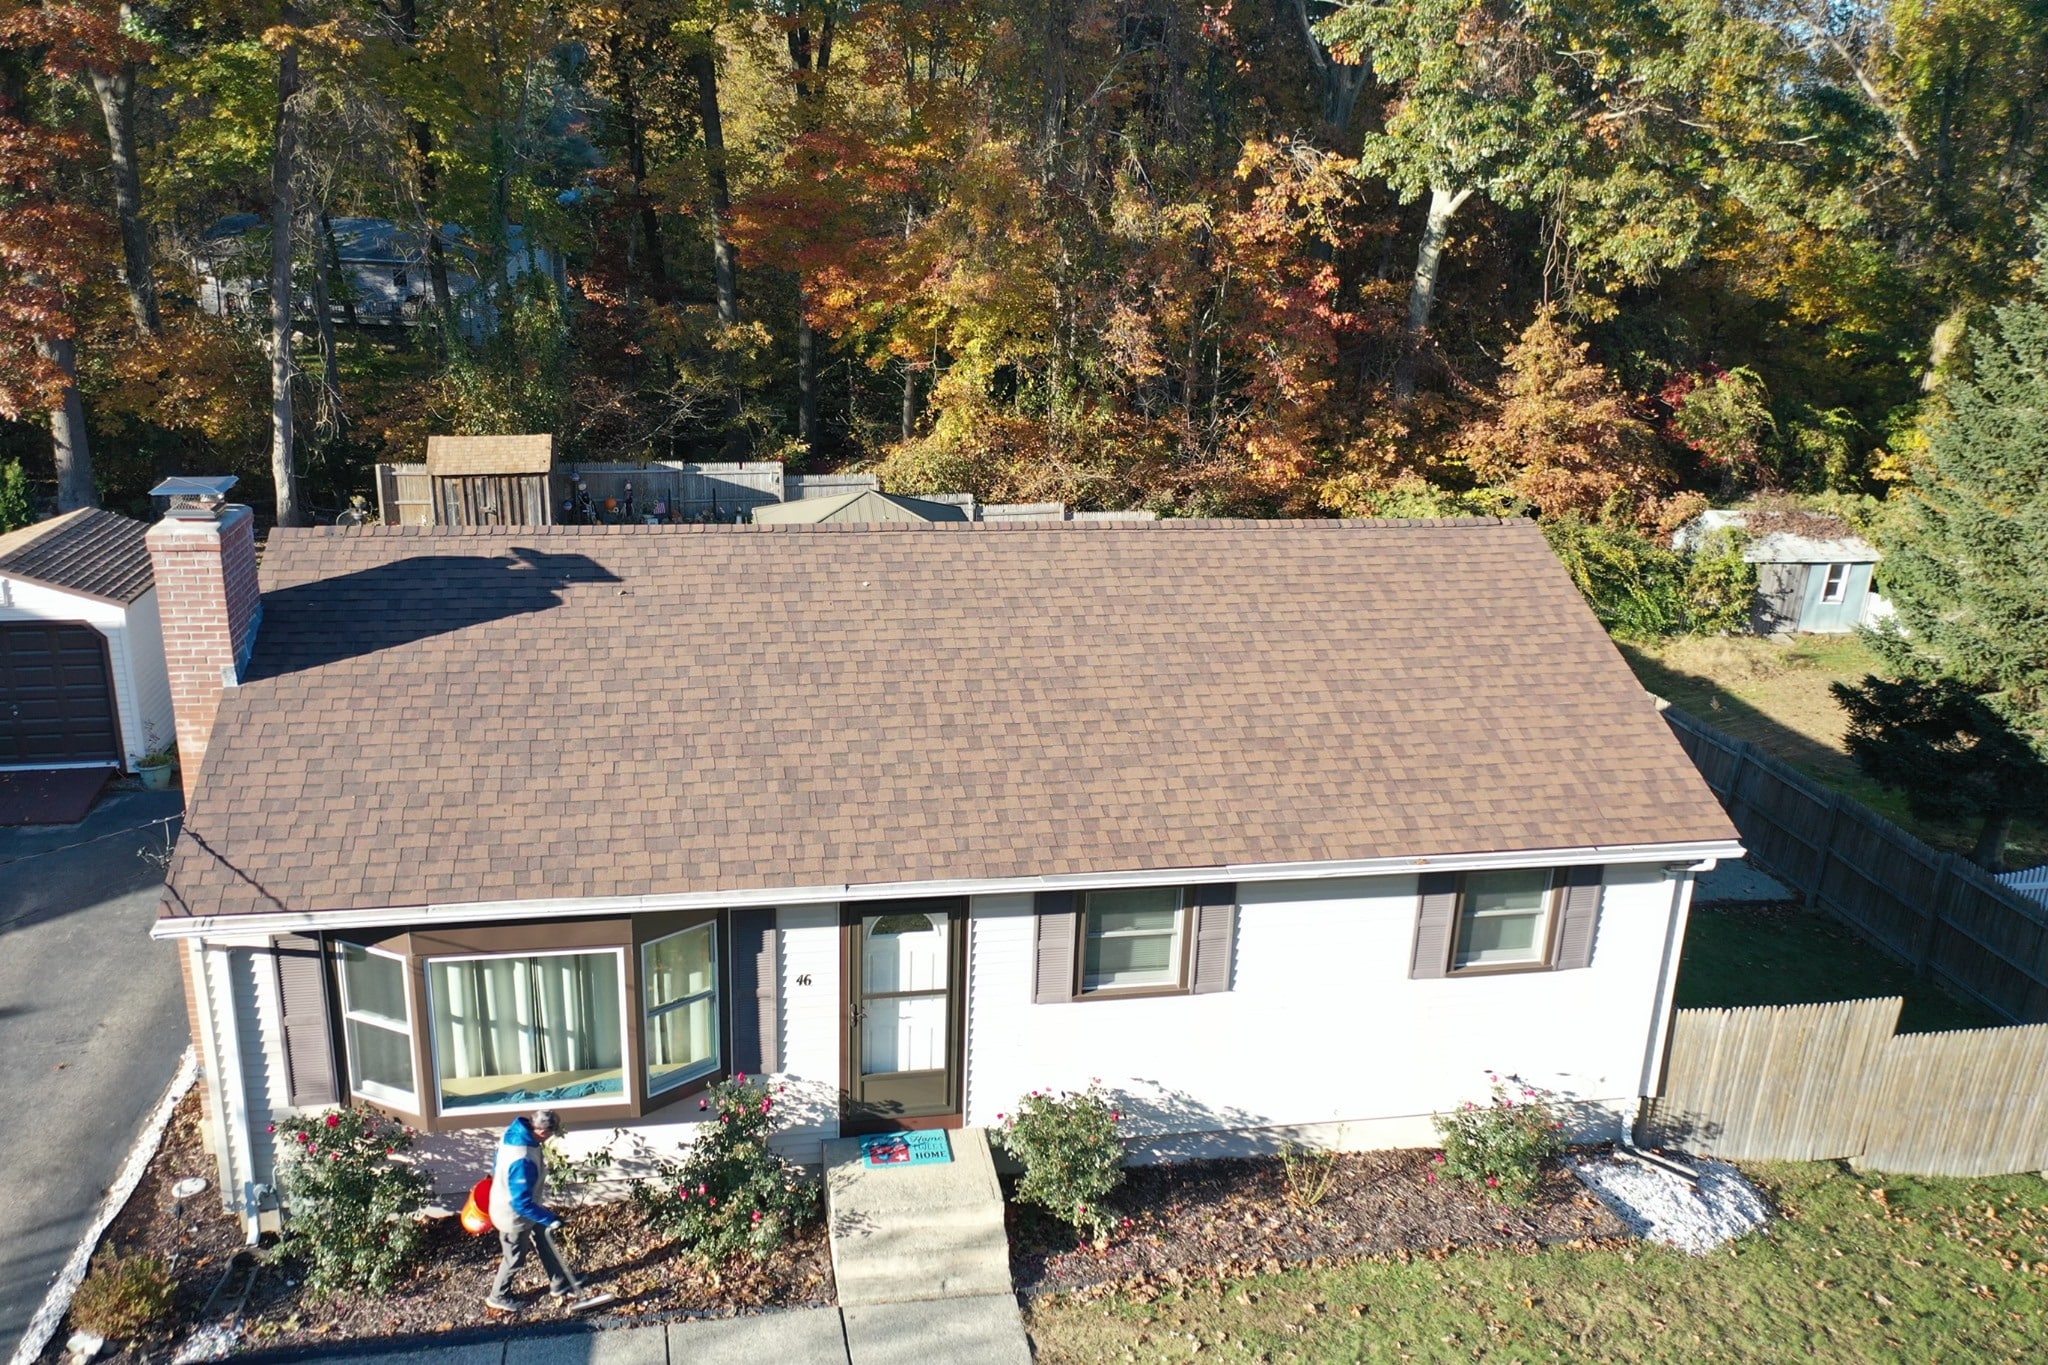 Oakdale CT Roof Replacement 4 BP Builder Company in CT | Roofer, Roof Replacement, CT Roofing Company & General Contractor CT